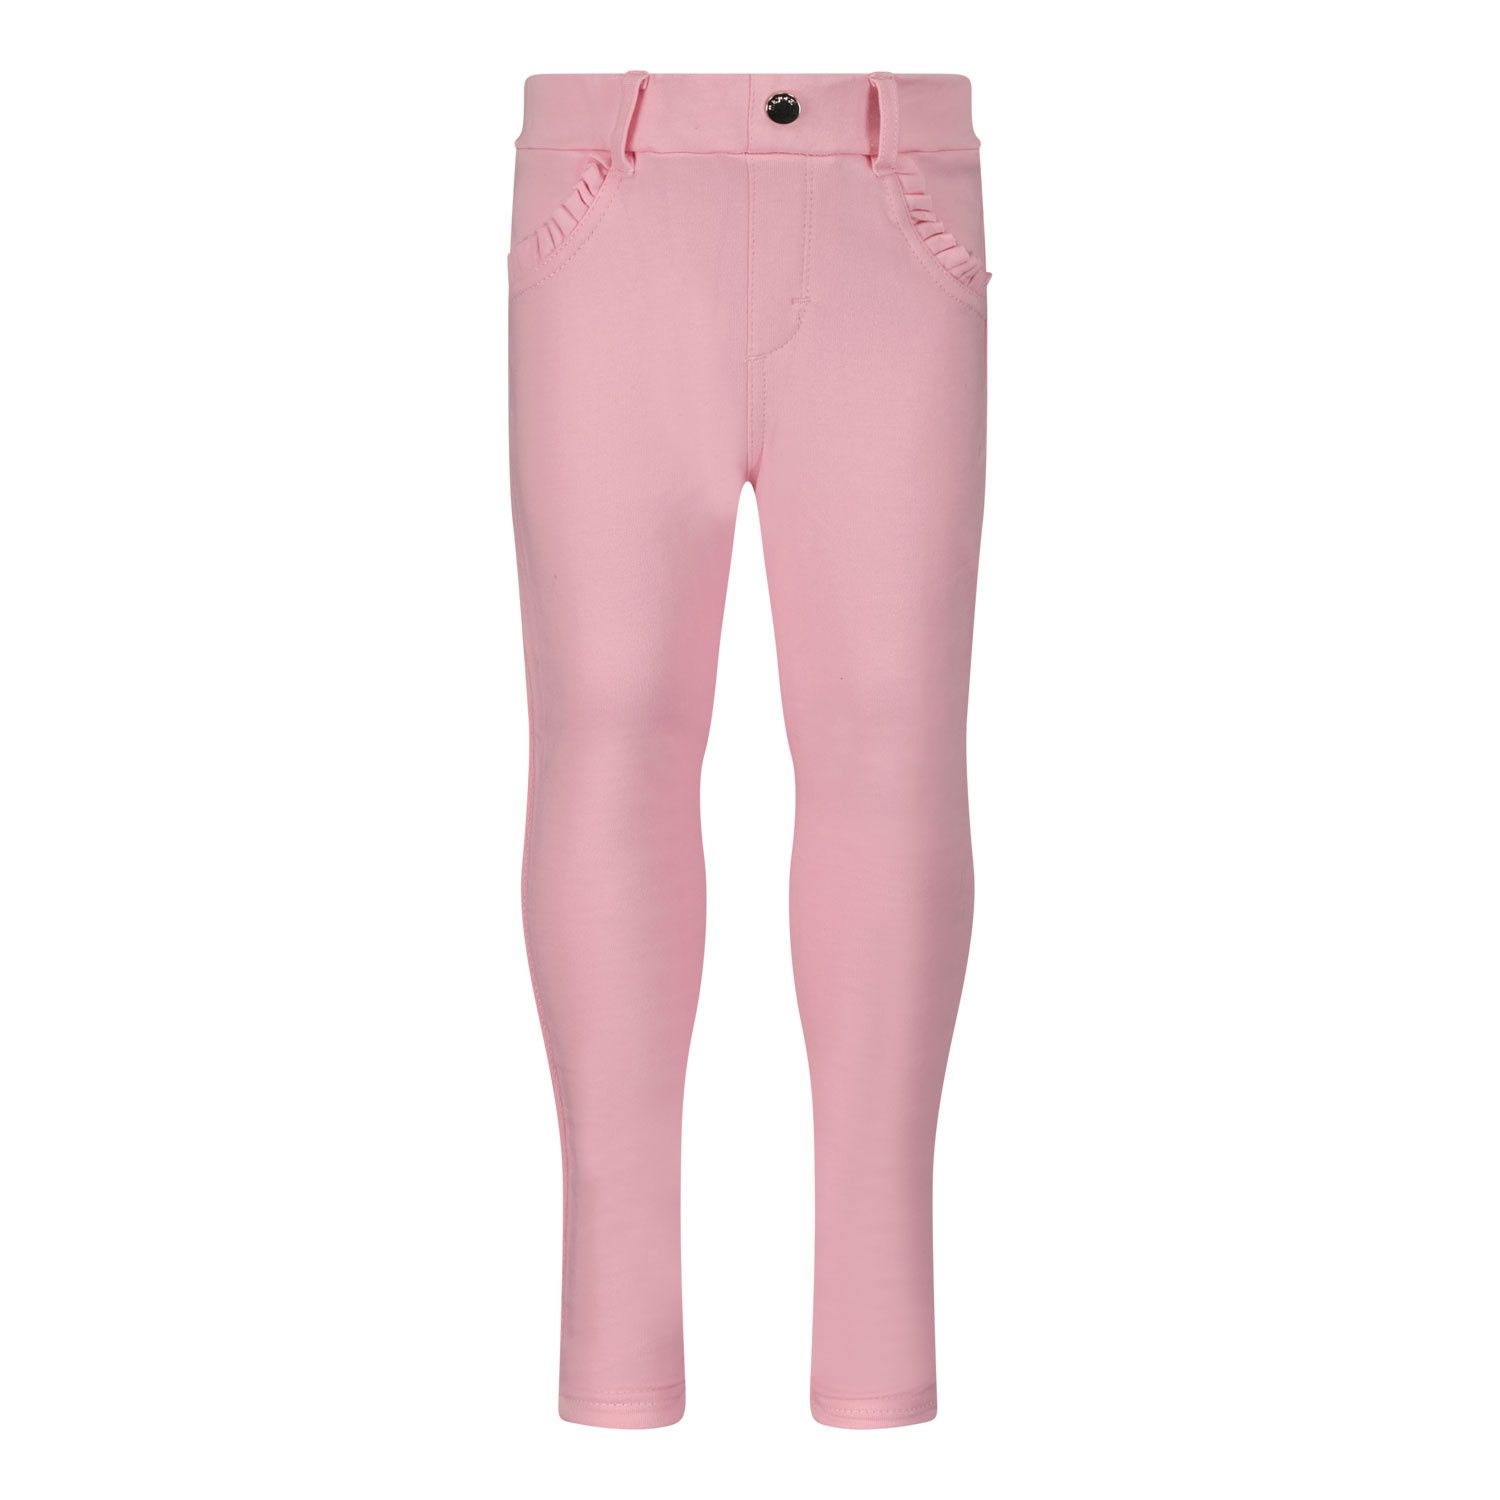 Picture of Mayoral 550 baby pants light pink